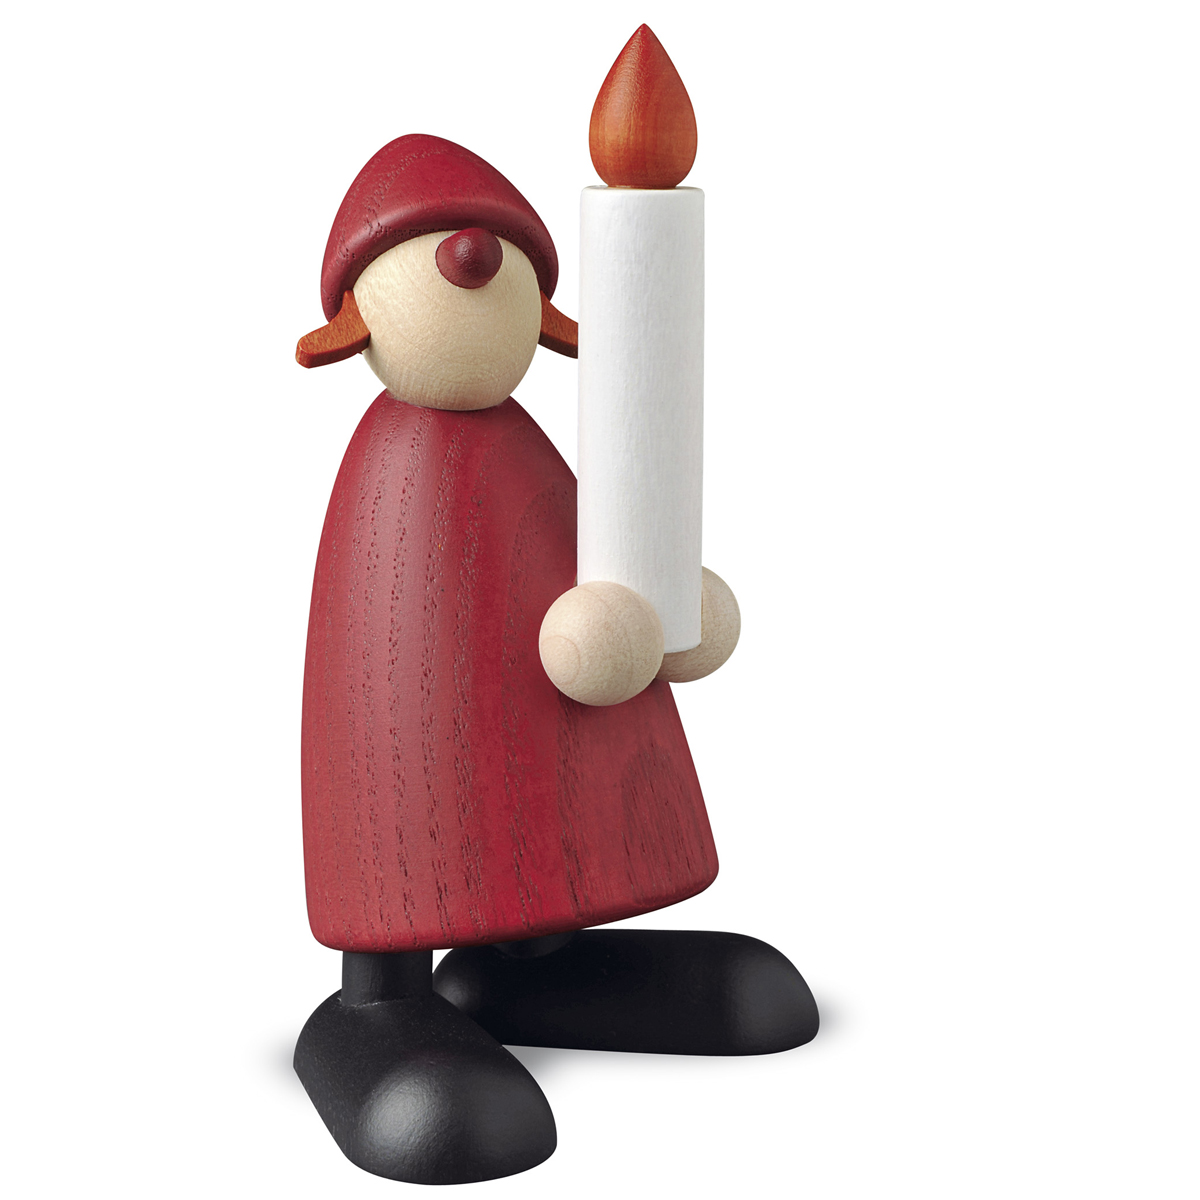 Mrs Claus holding a candle, small